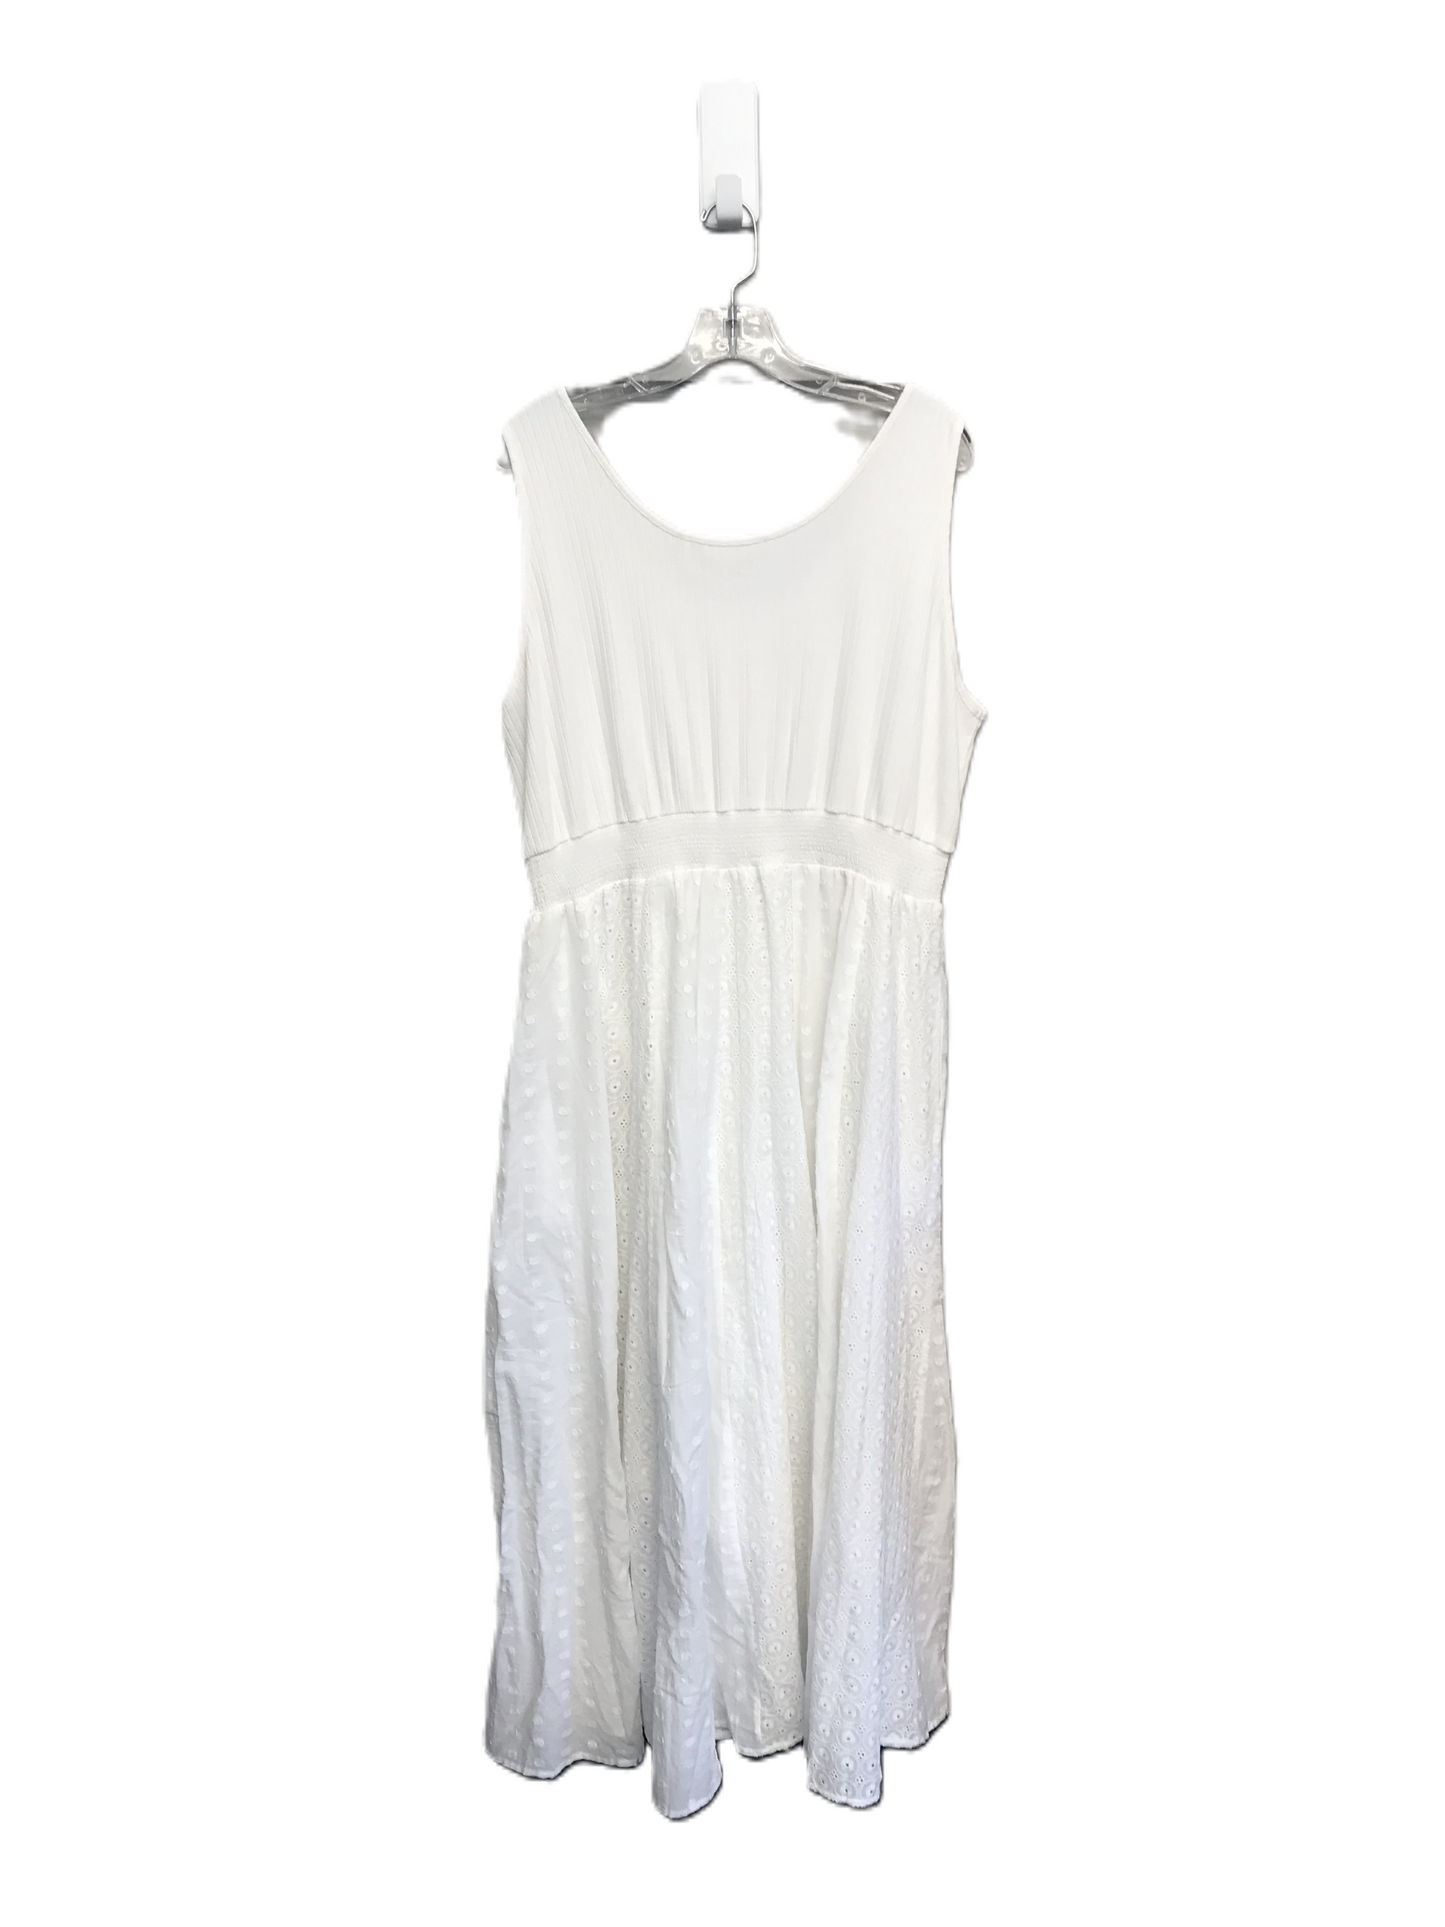 White Dress Casual Maxi By Soft Surroundings, Size: 1x